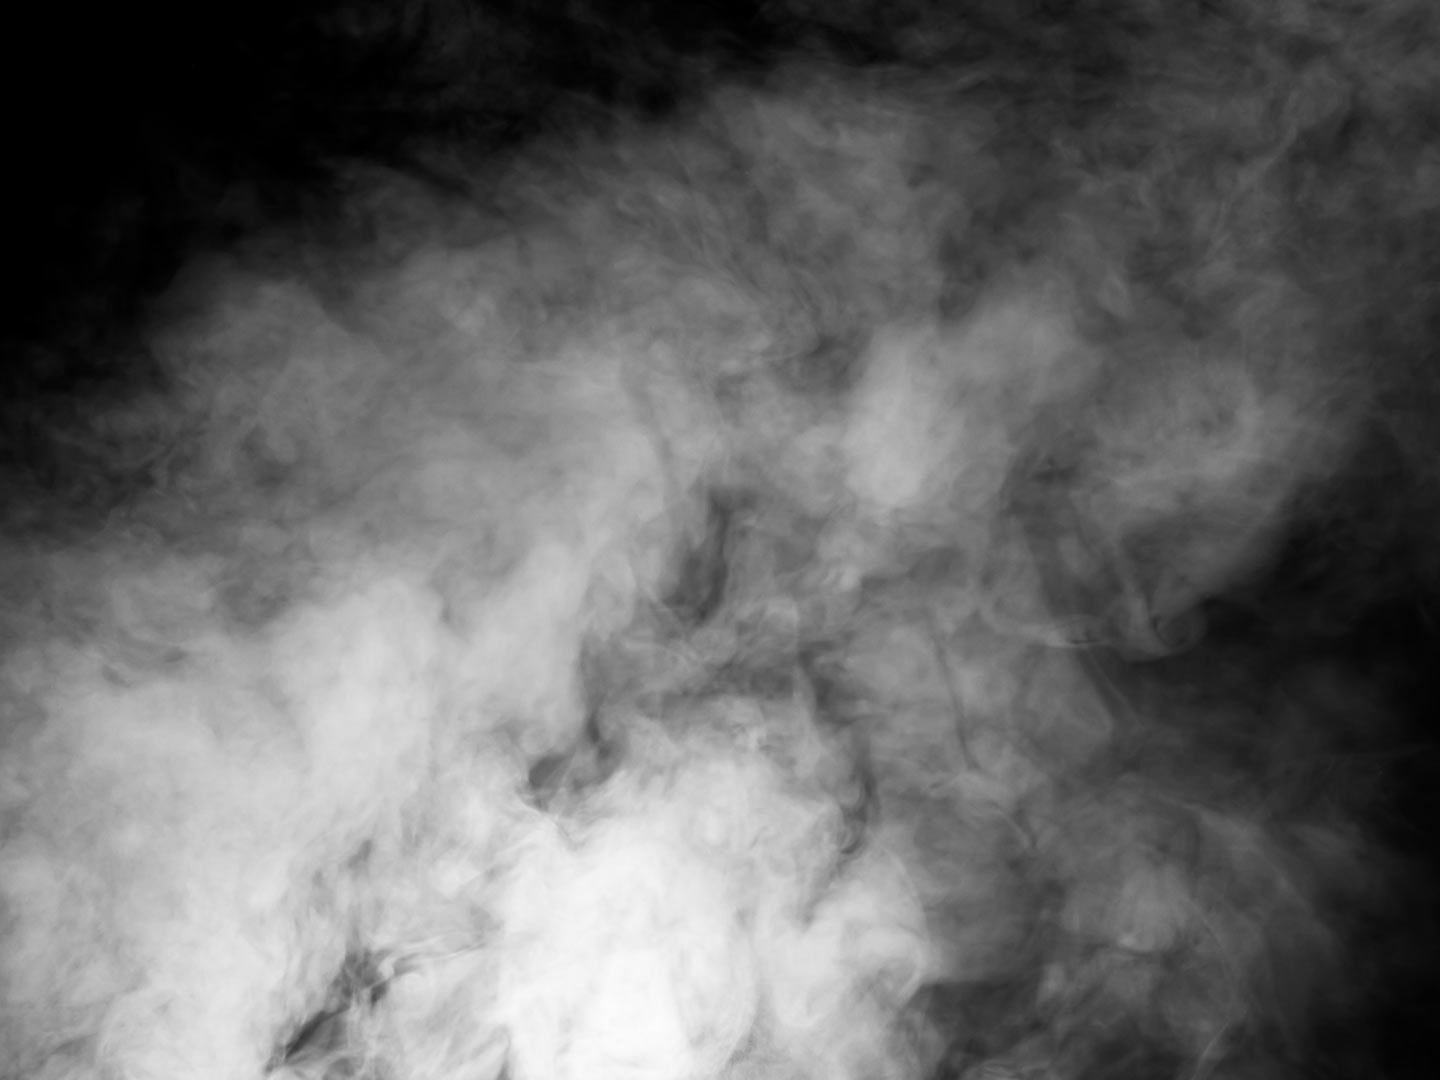 Phantosmia: Smelling Smoke All the Time? - Andrew Weil, M.D.